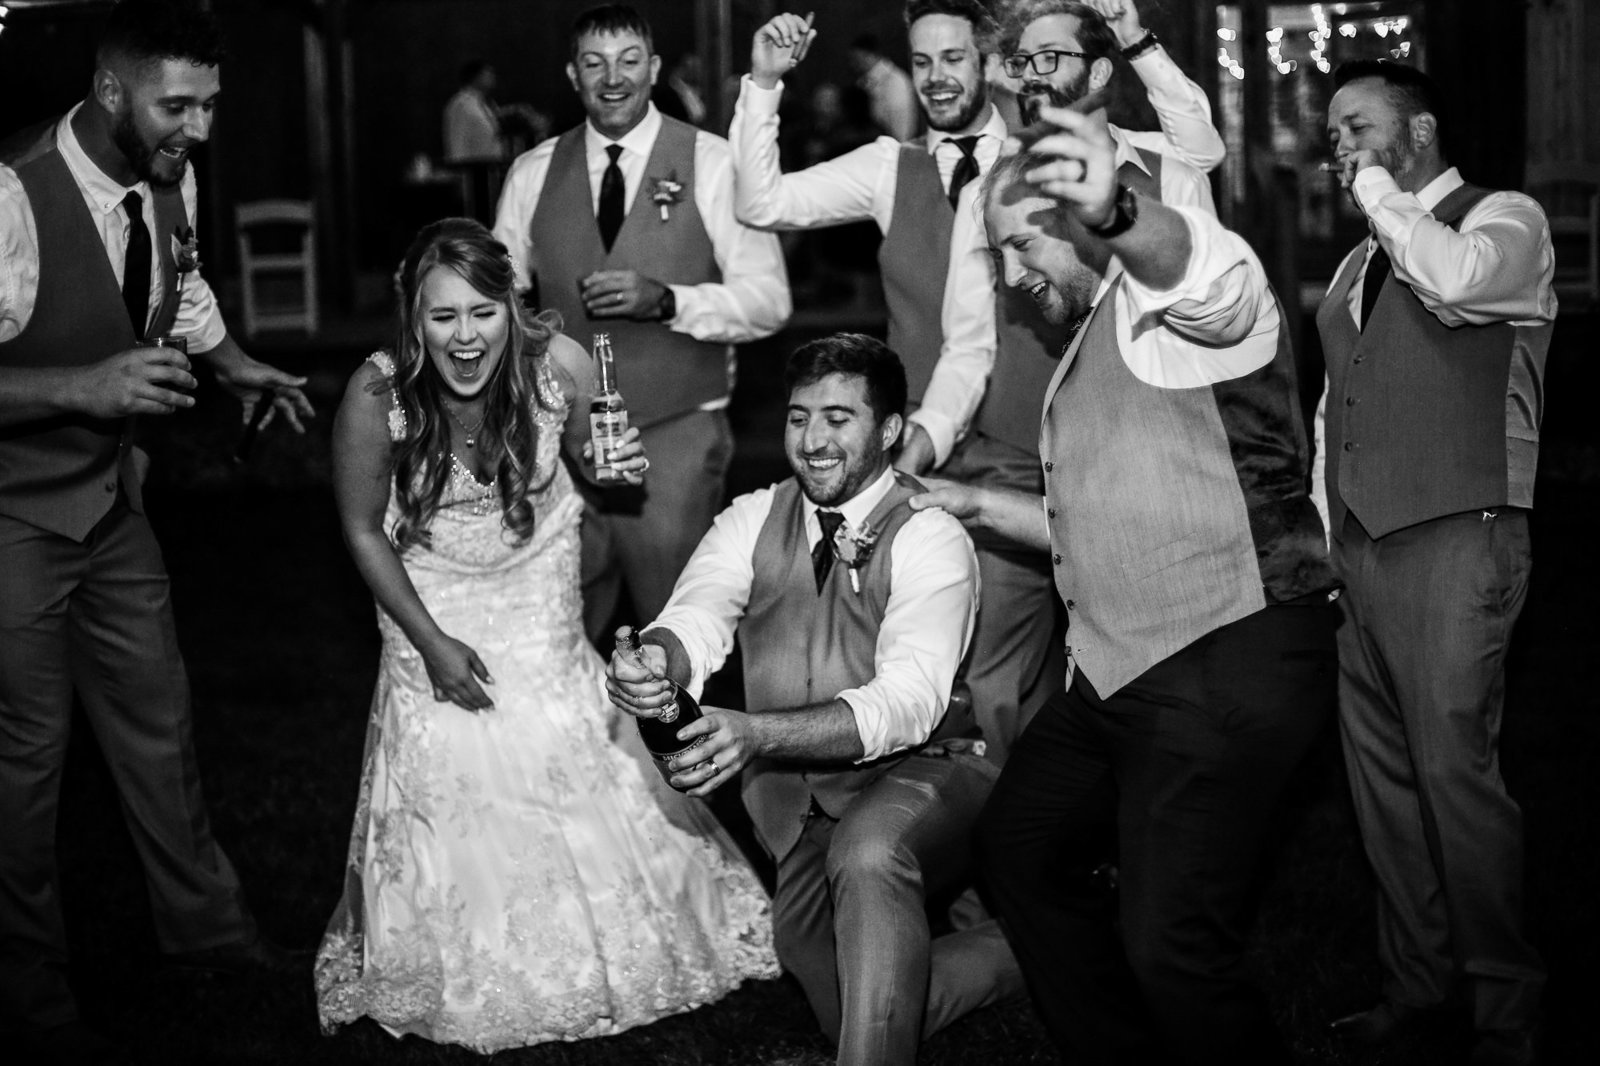 Bridal party laughs as groomsman aatempts to open a bottle of champagne